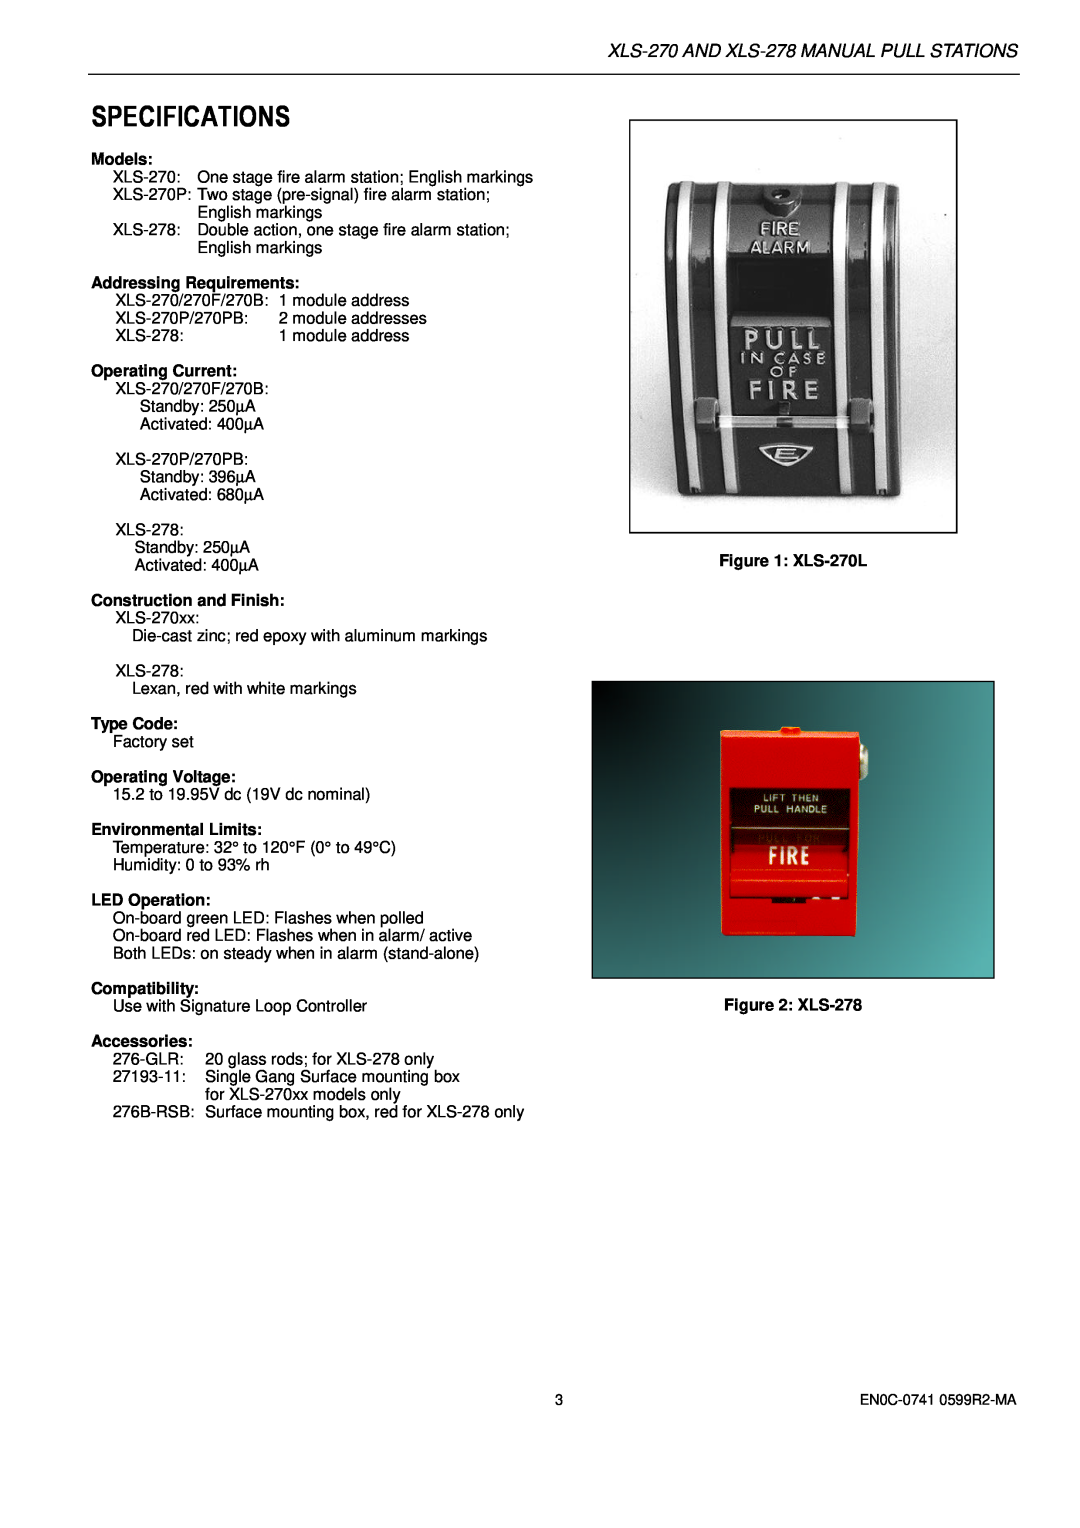 Honeywell manual Specifications, XLS-270AND XLS-278MANUAL PULL STATIONS 